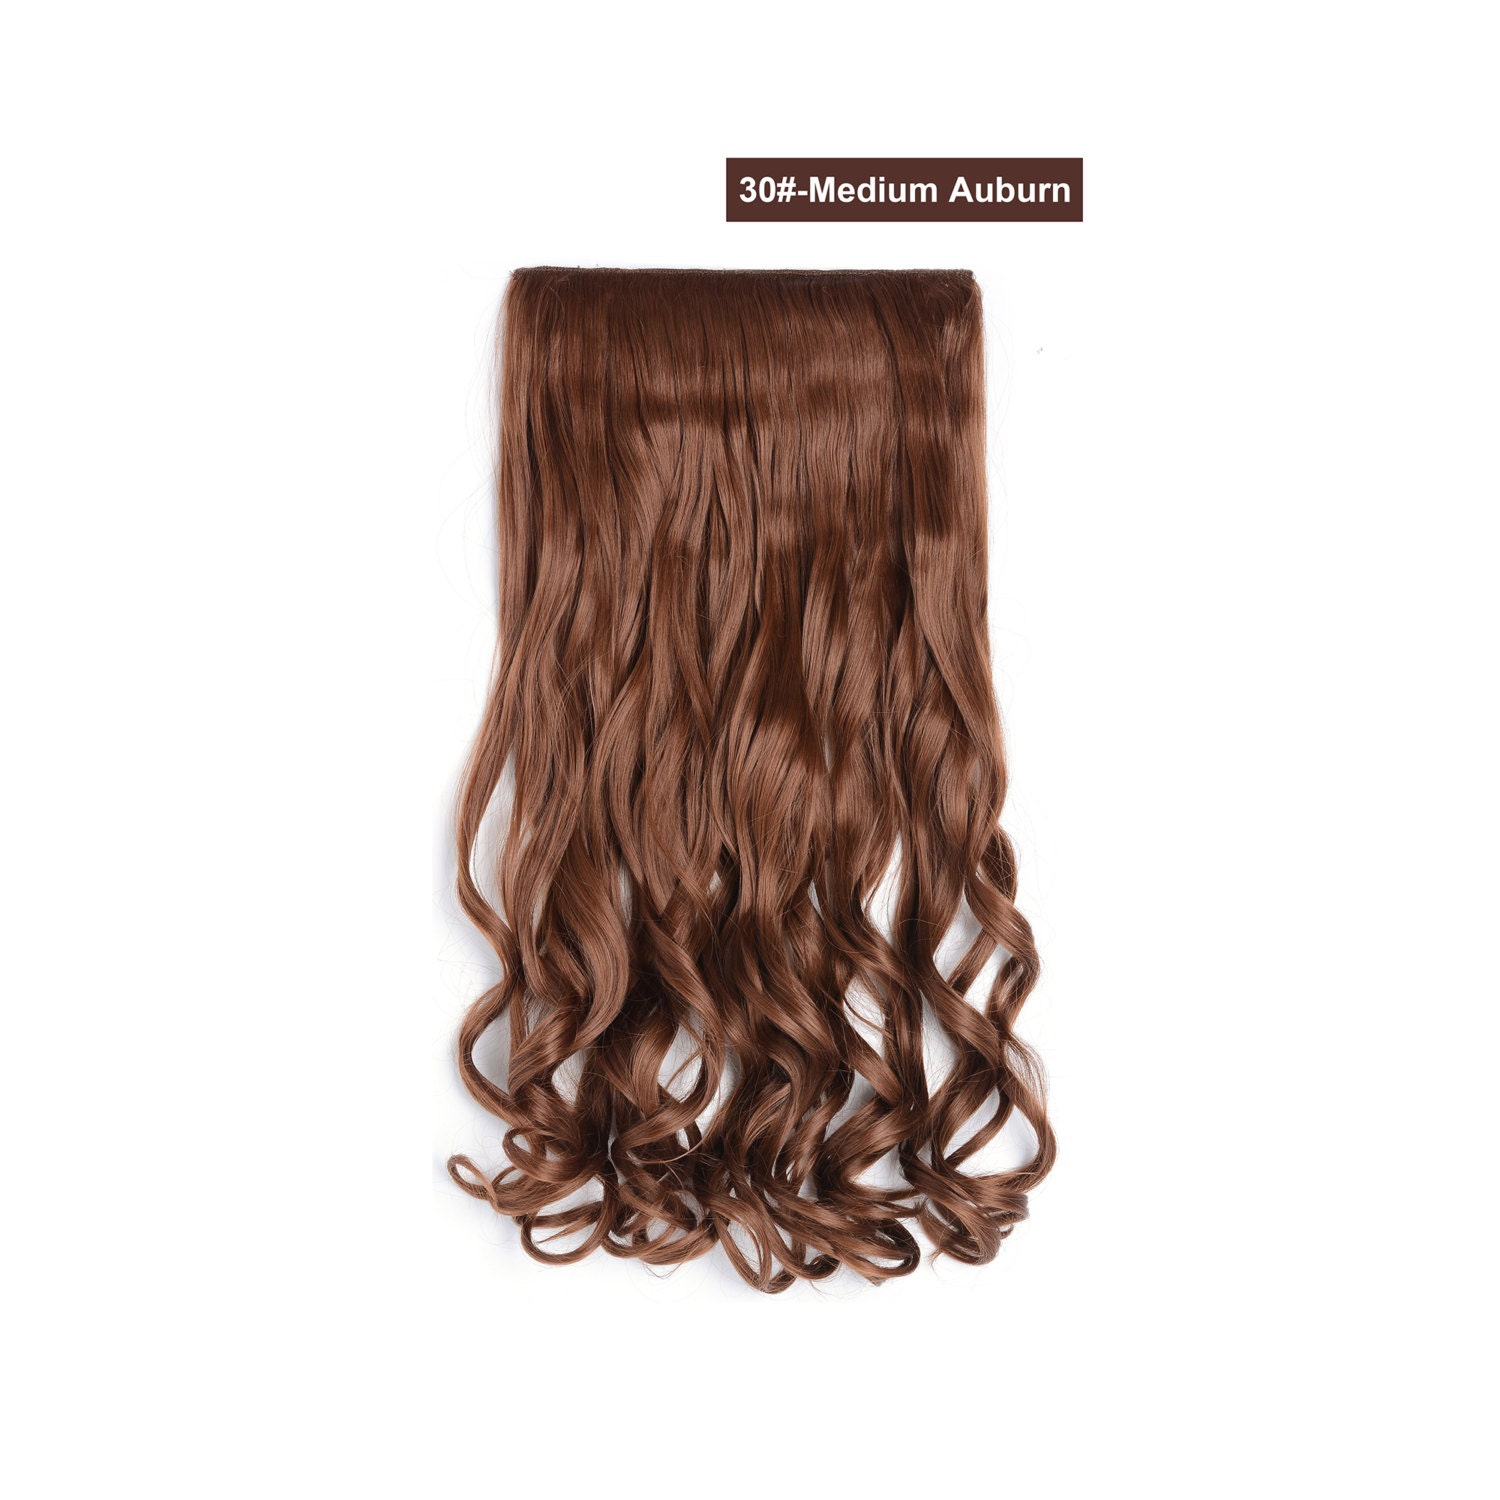 20 Curly 3/4 Full Head Synthetic Hair Extensions by ShawnHairShop